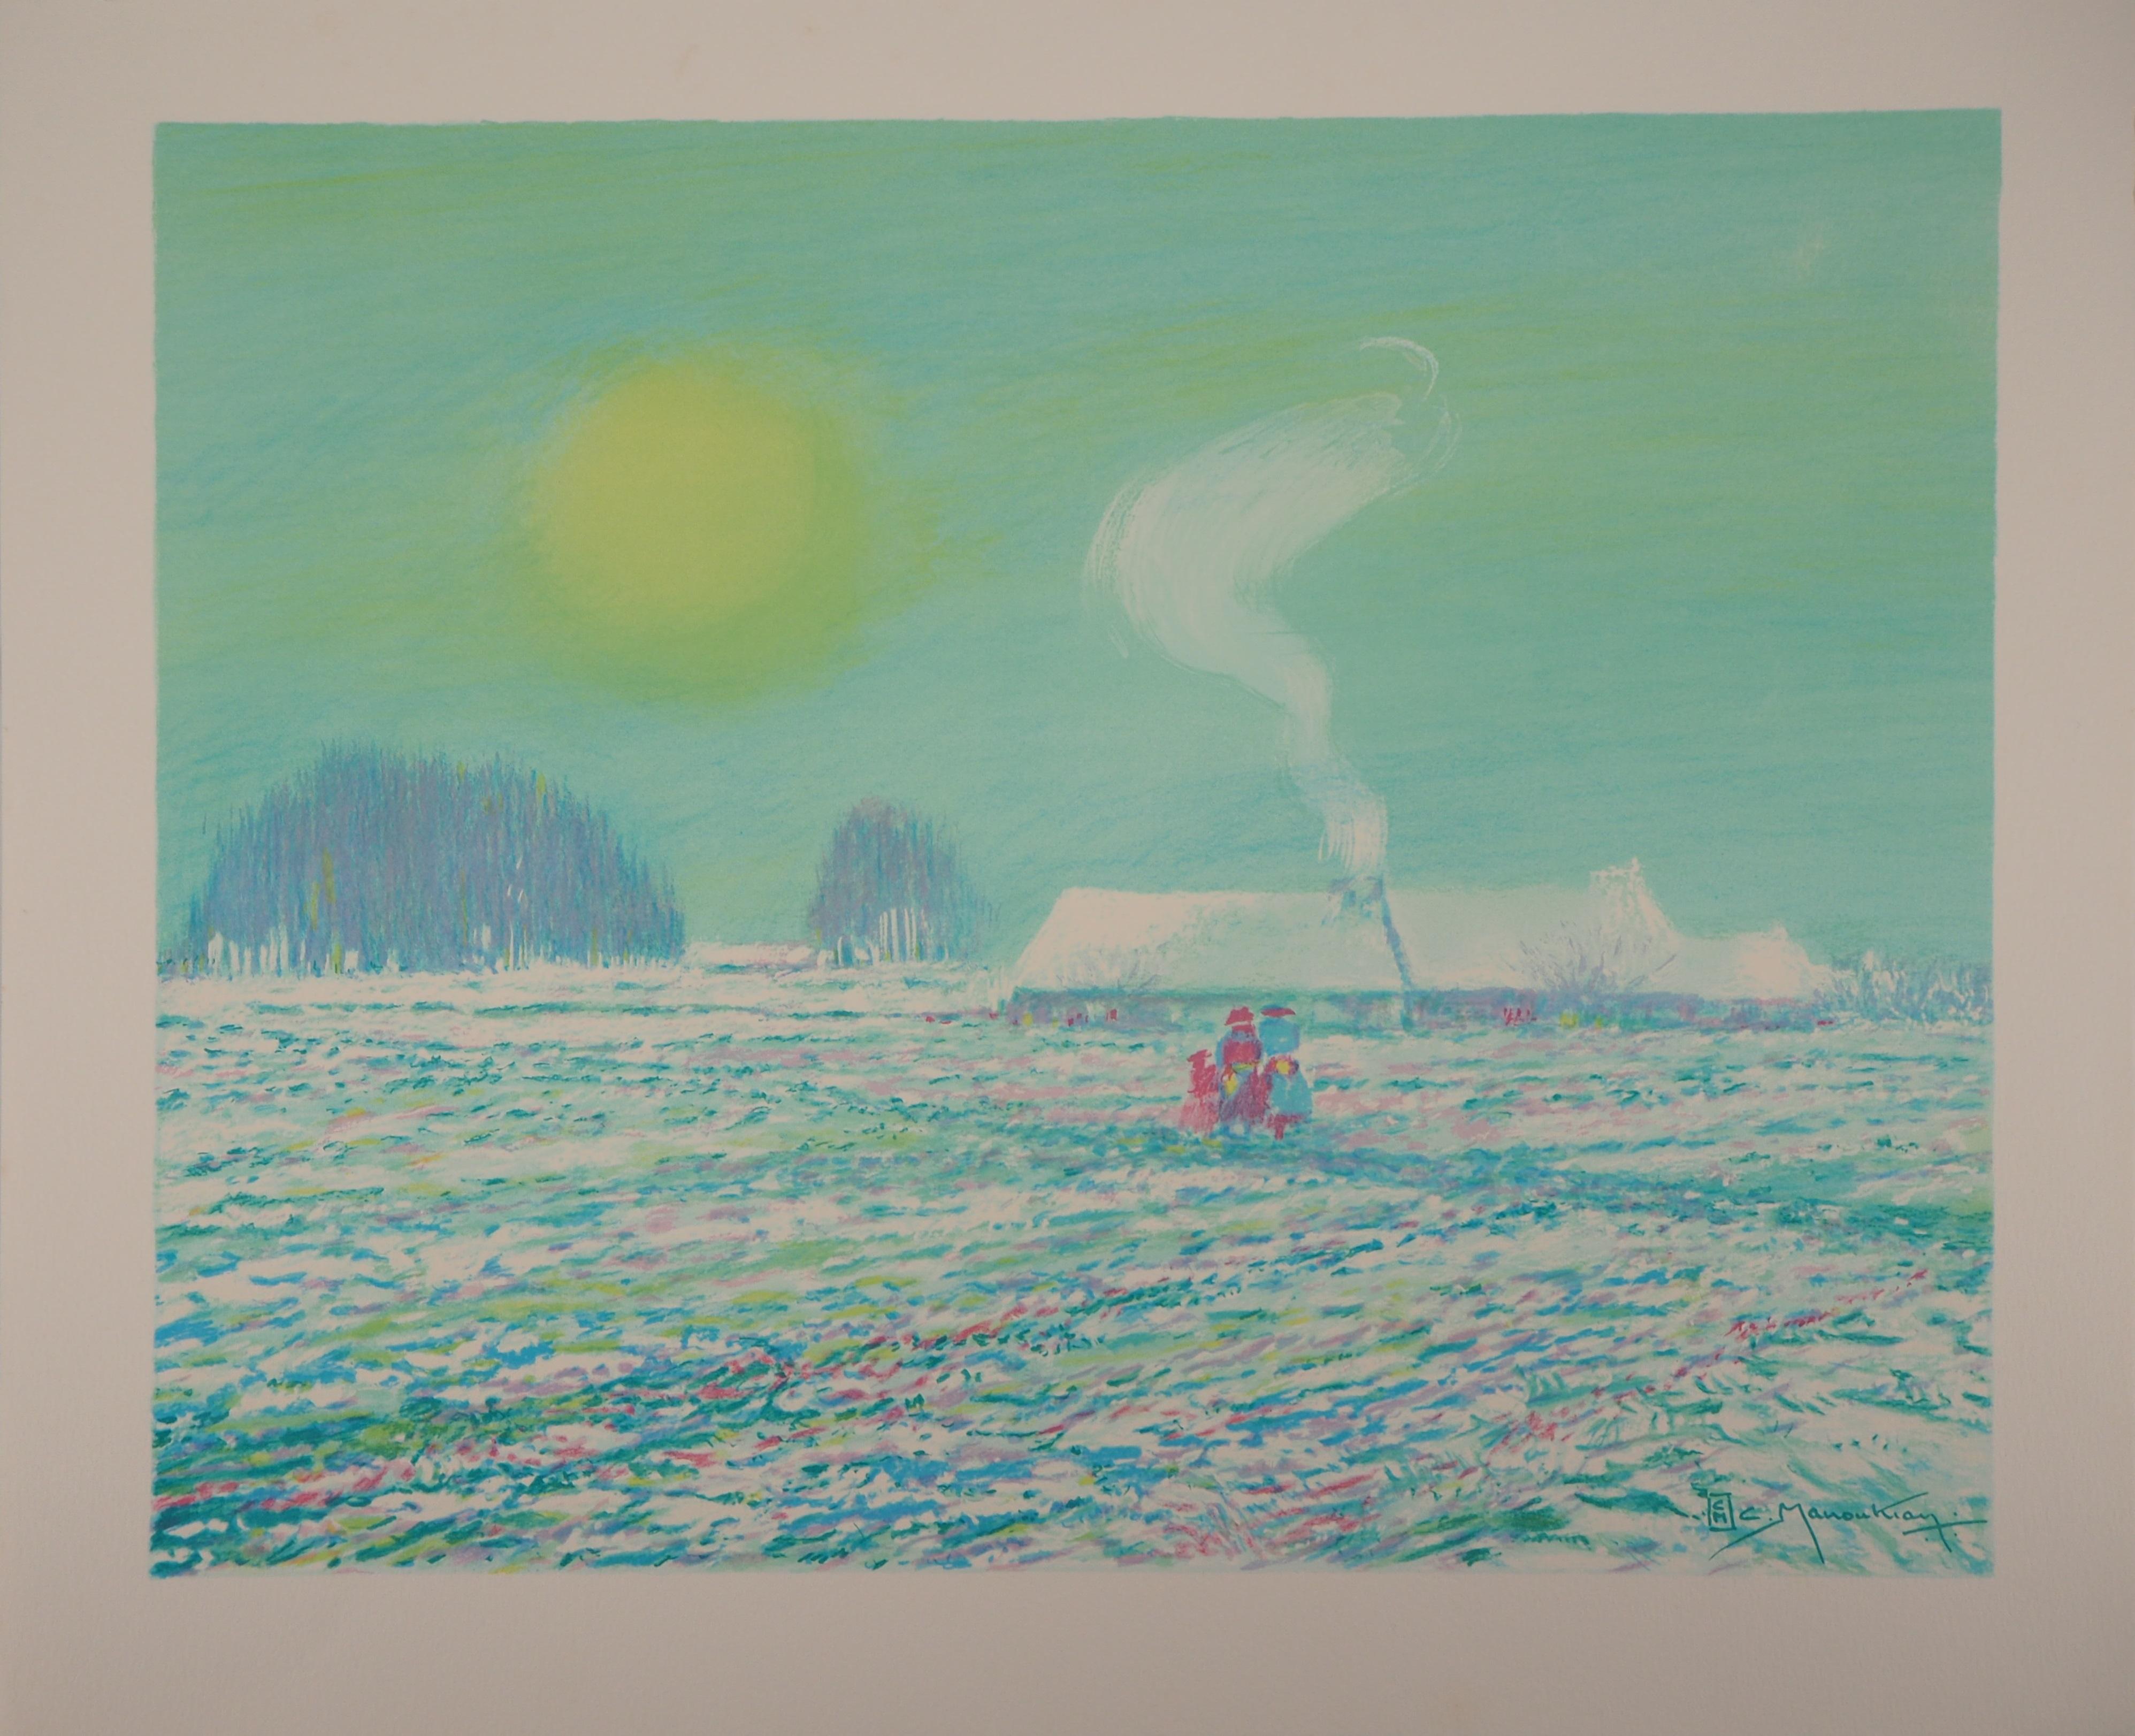 Normandy : A Nice Winter Day - Original lithograph